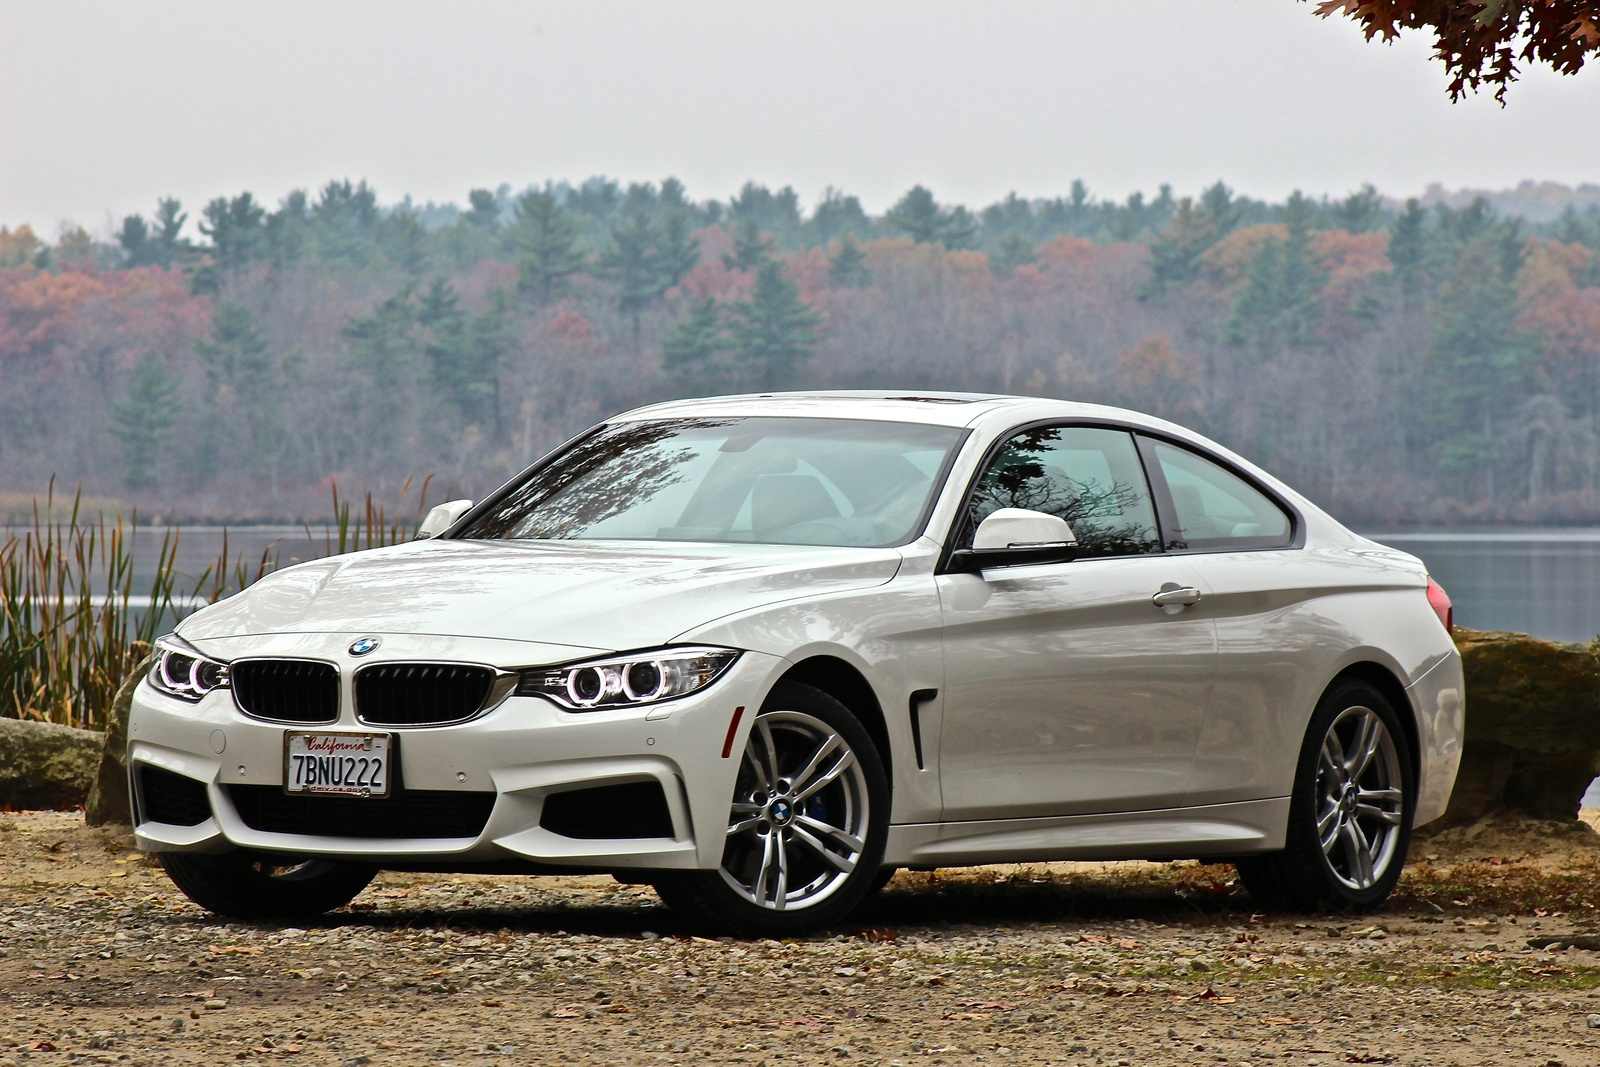 2014 BMW 4 Series: Prices, Reviews & Pictures - CarGurus